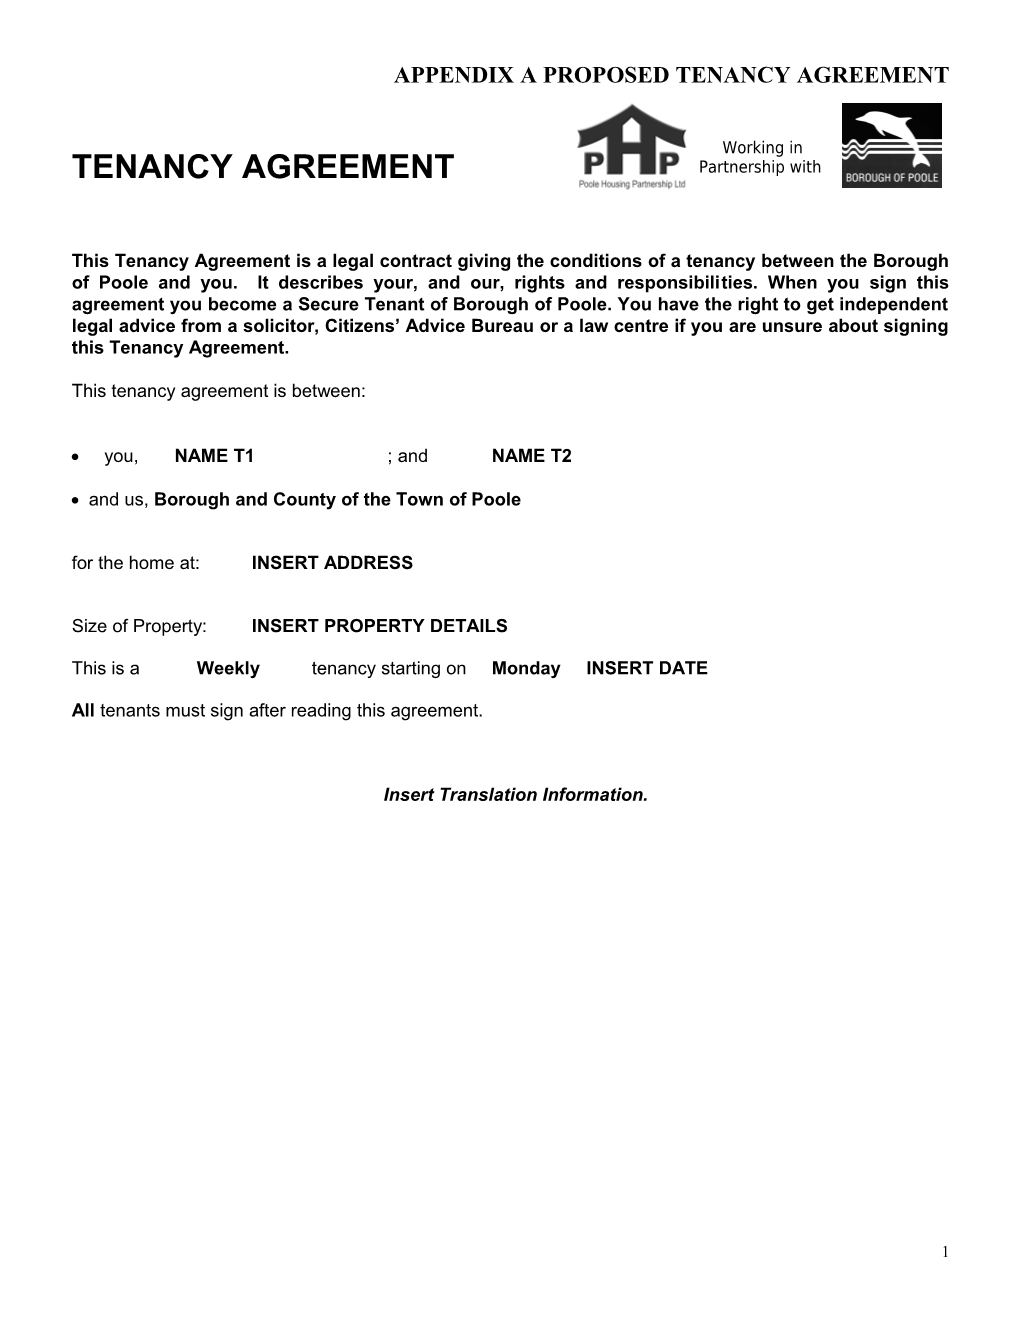 Appendix a Proposed Tenancy Agreement